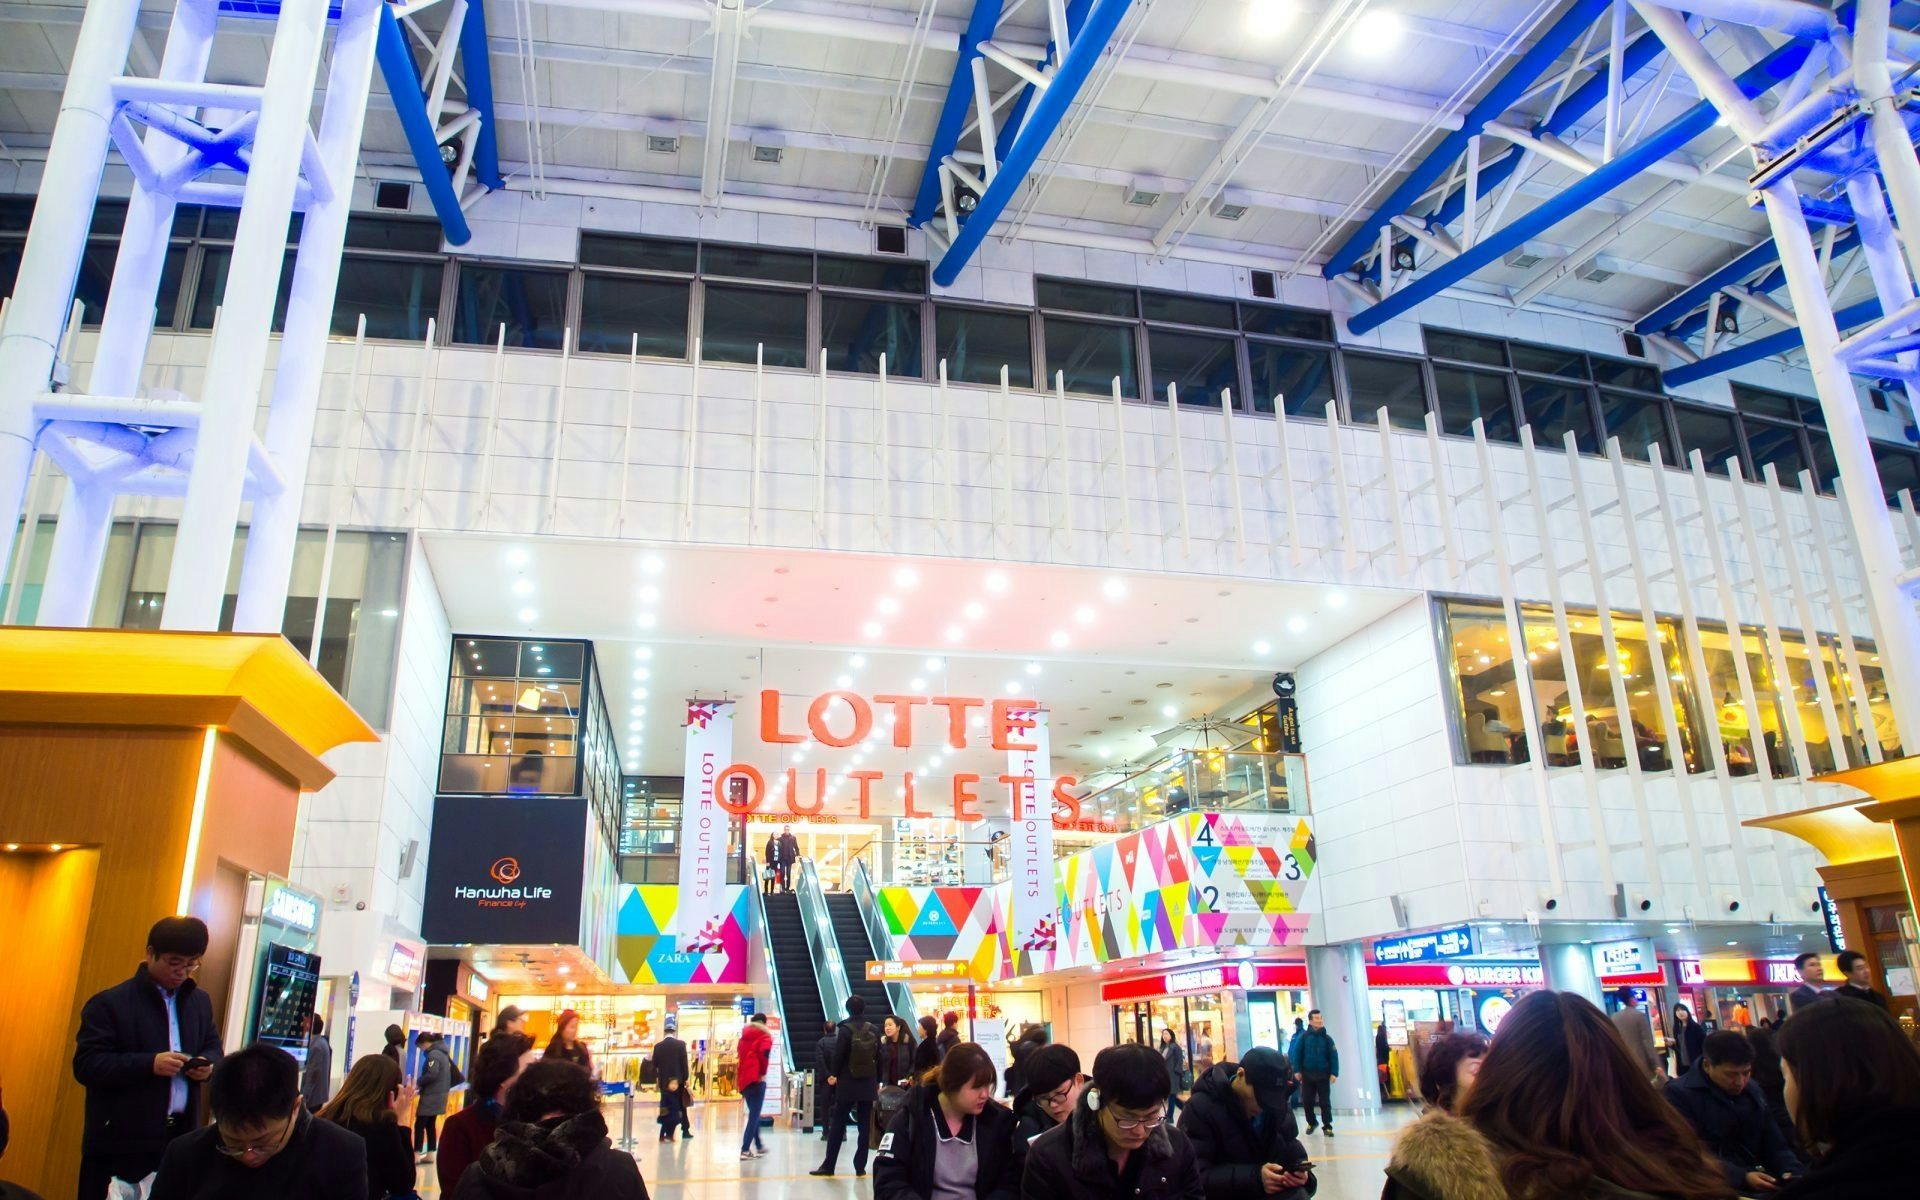 South Korean conglomorate Lotte was one of the winning bidders for new duty-free licenses. (T.Dallas/Shutterstock)